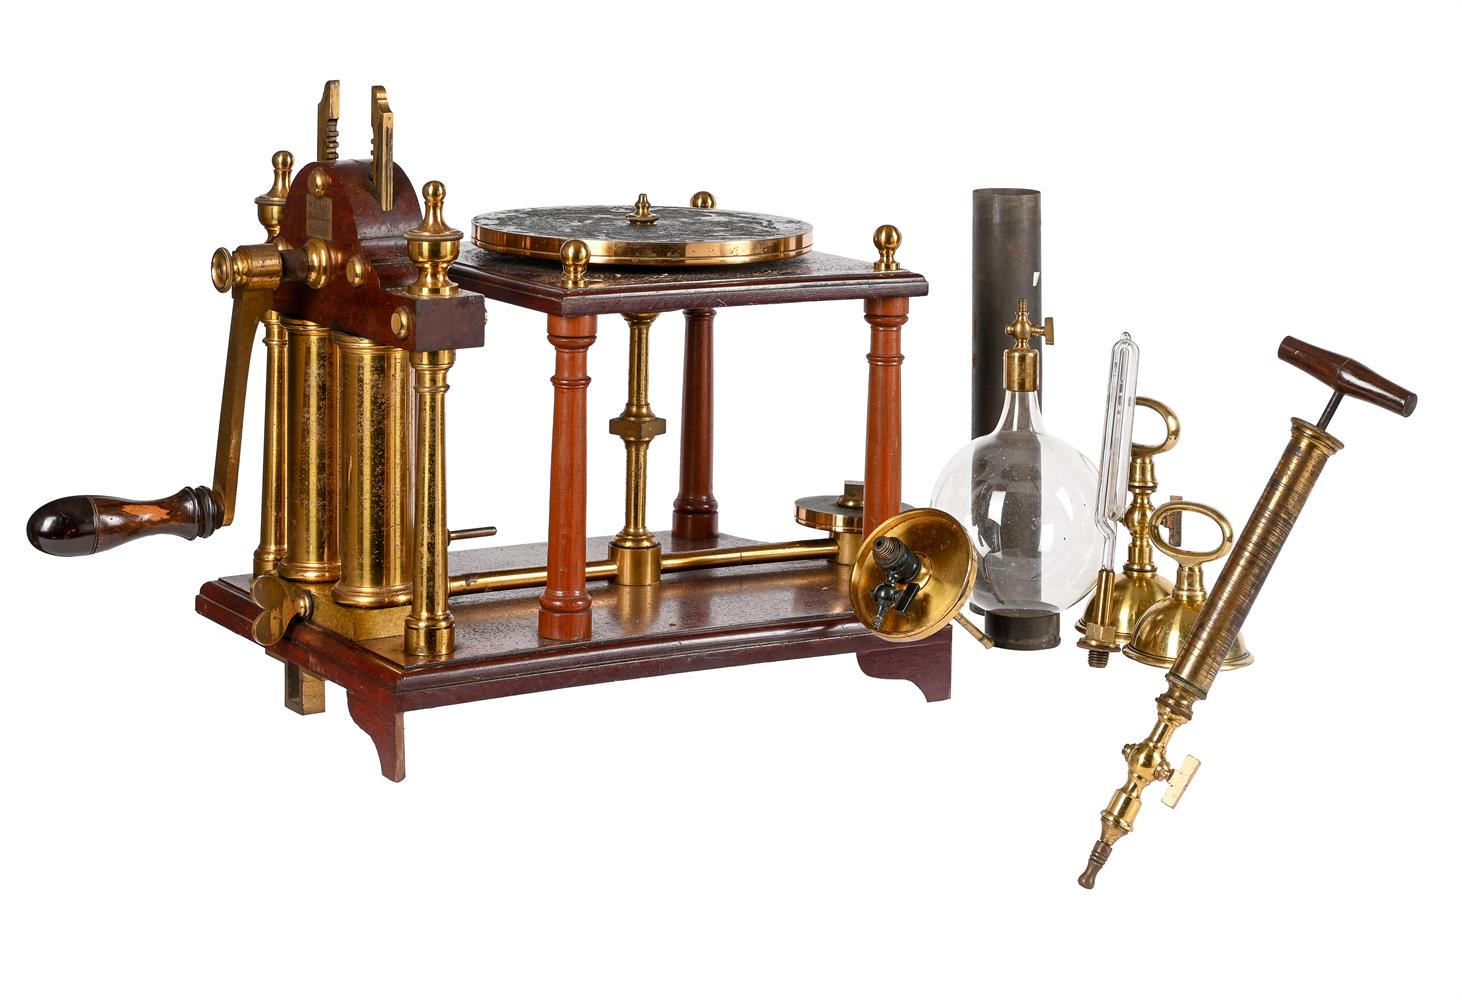 A RARE LACQUERED BRASS AND MAHOGANY HAWKSBEE-TYPE DOUBLE-ACTION DEMONSTRATION VACUUM PUMP